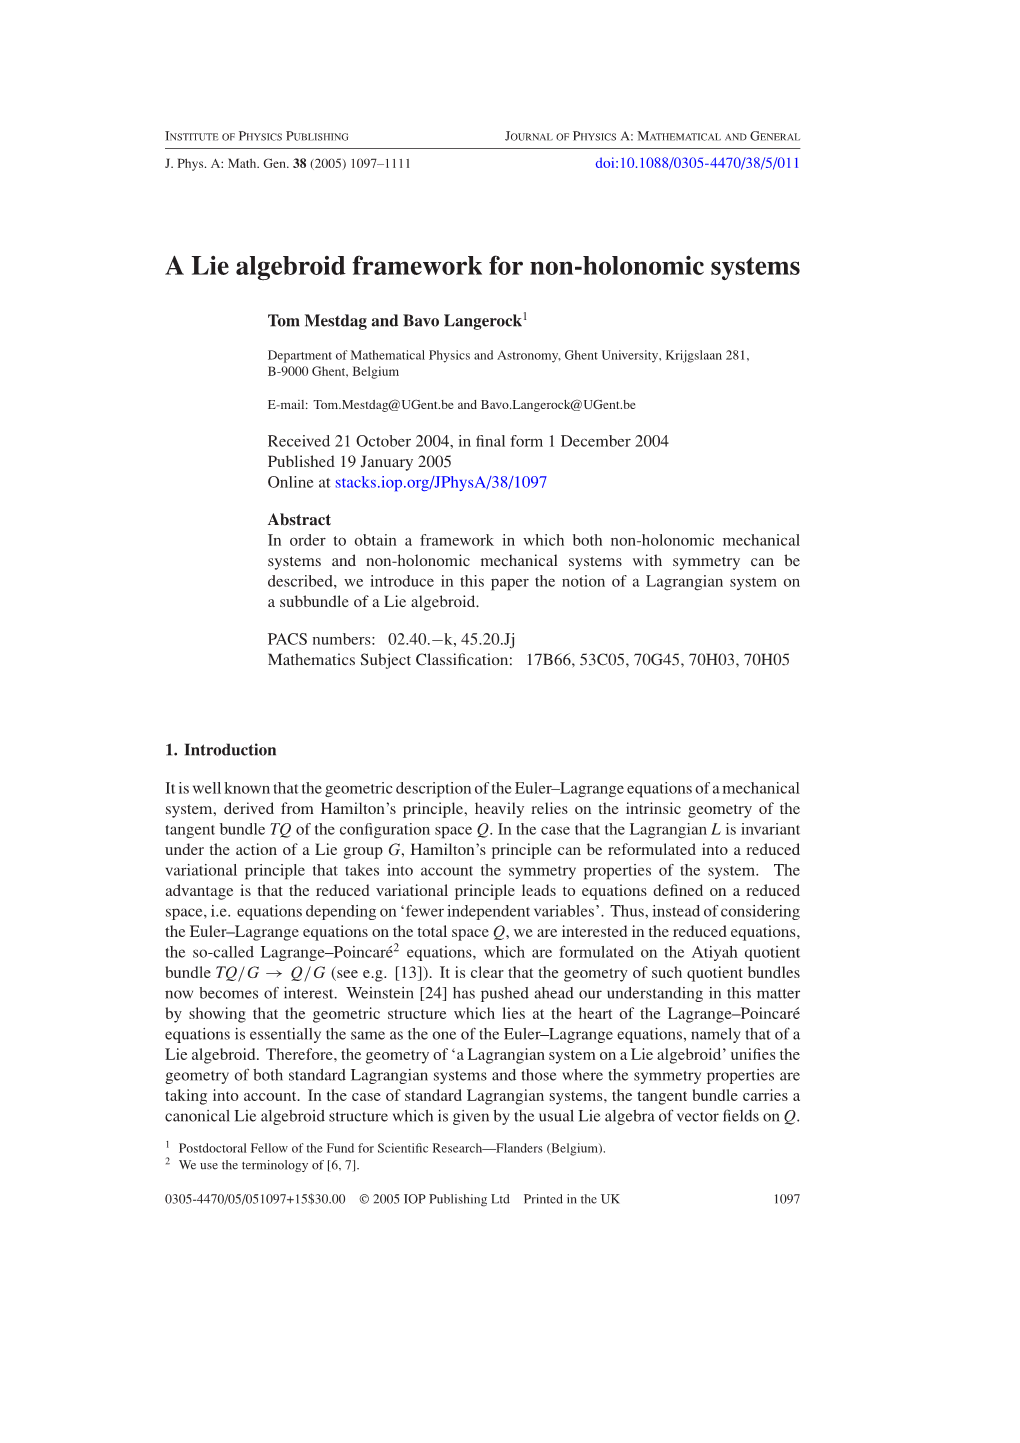 A Lie Algebroid Framework for Non-Holonomic Systems